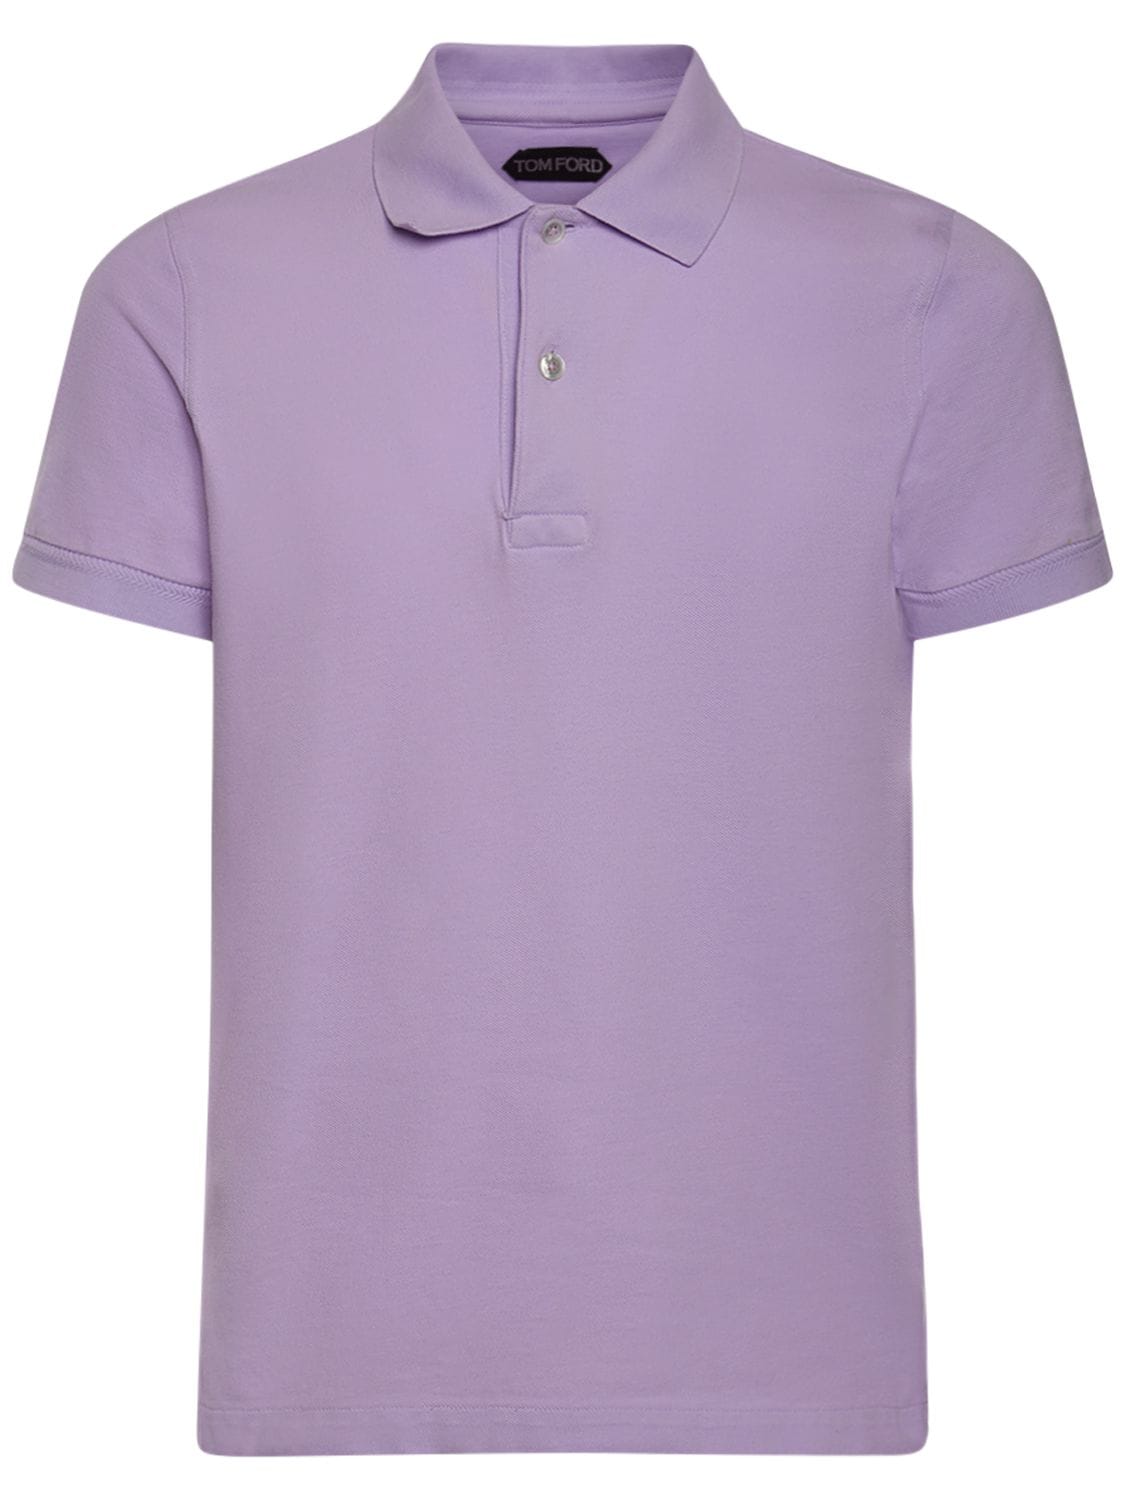 Tom Ford Tennis S/s Piquet Polo In Lavender